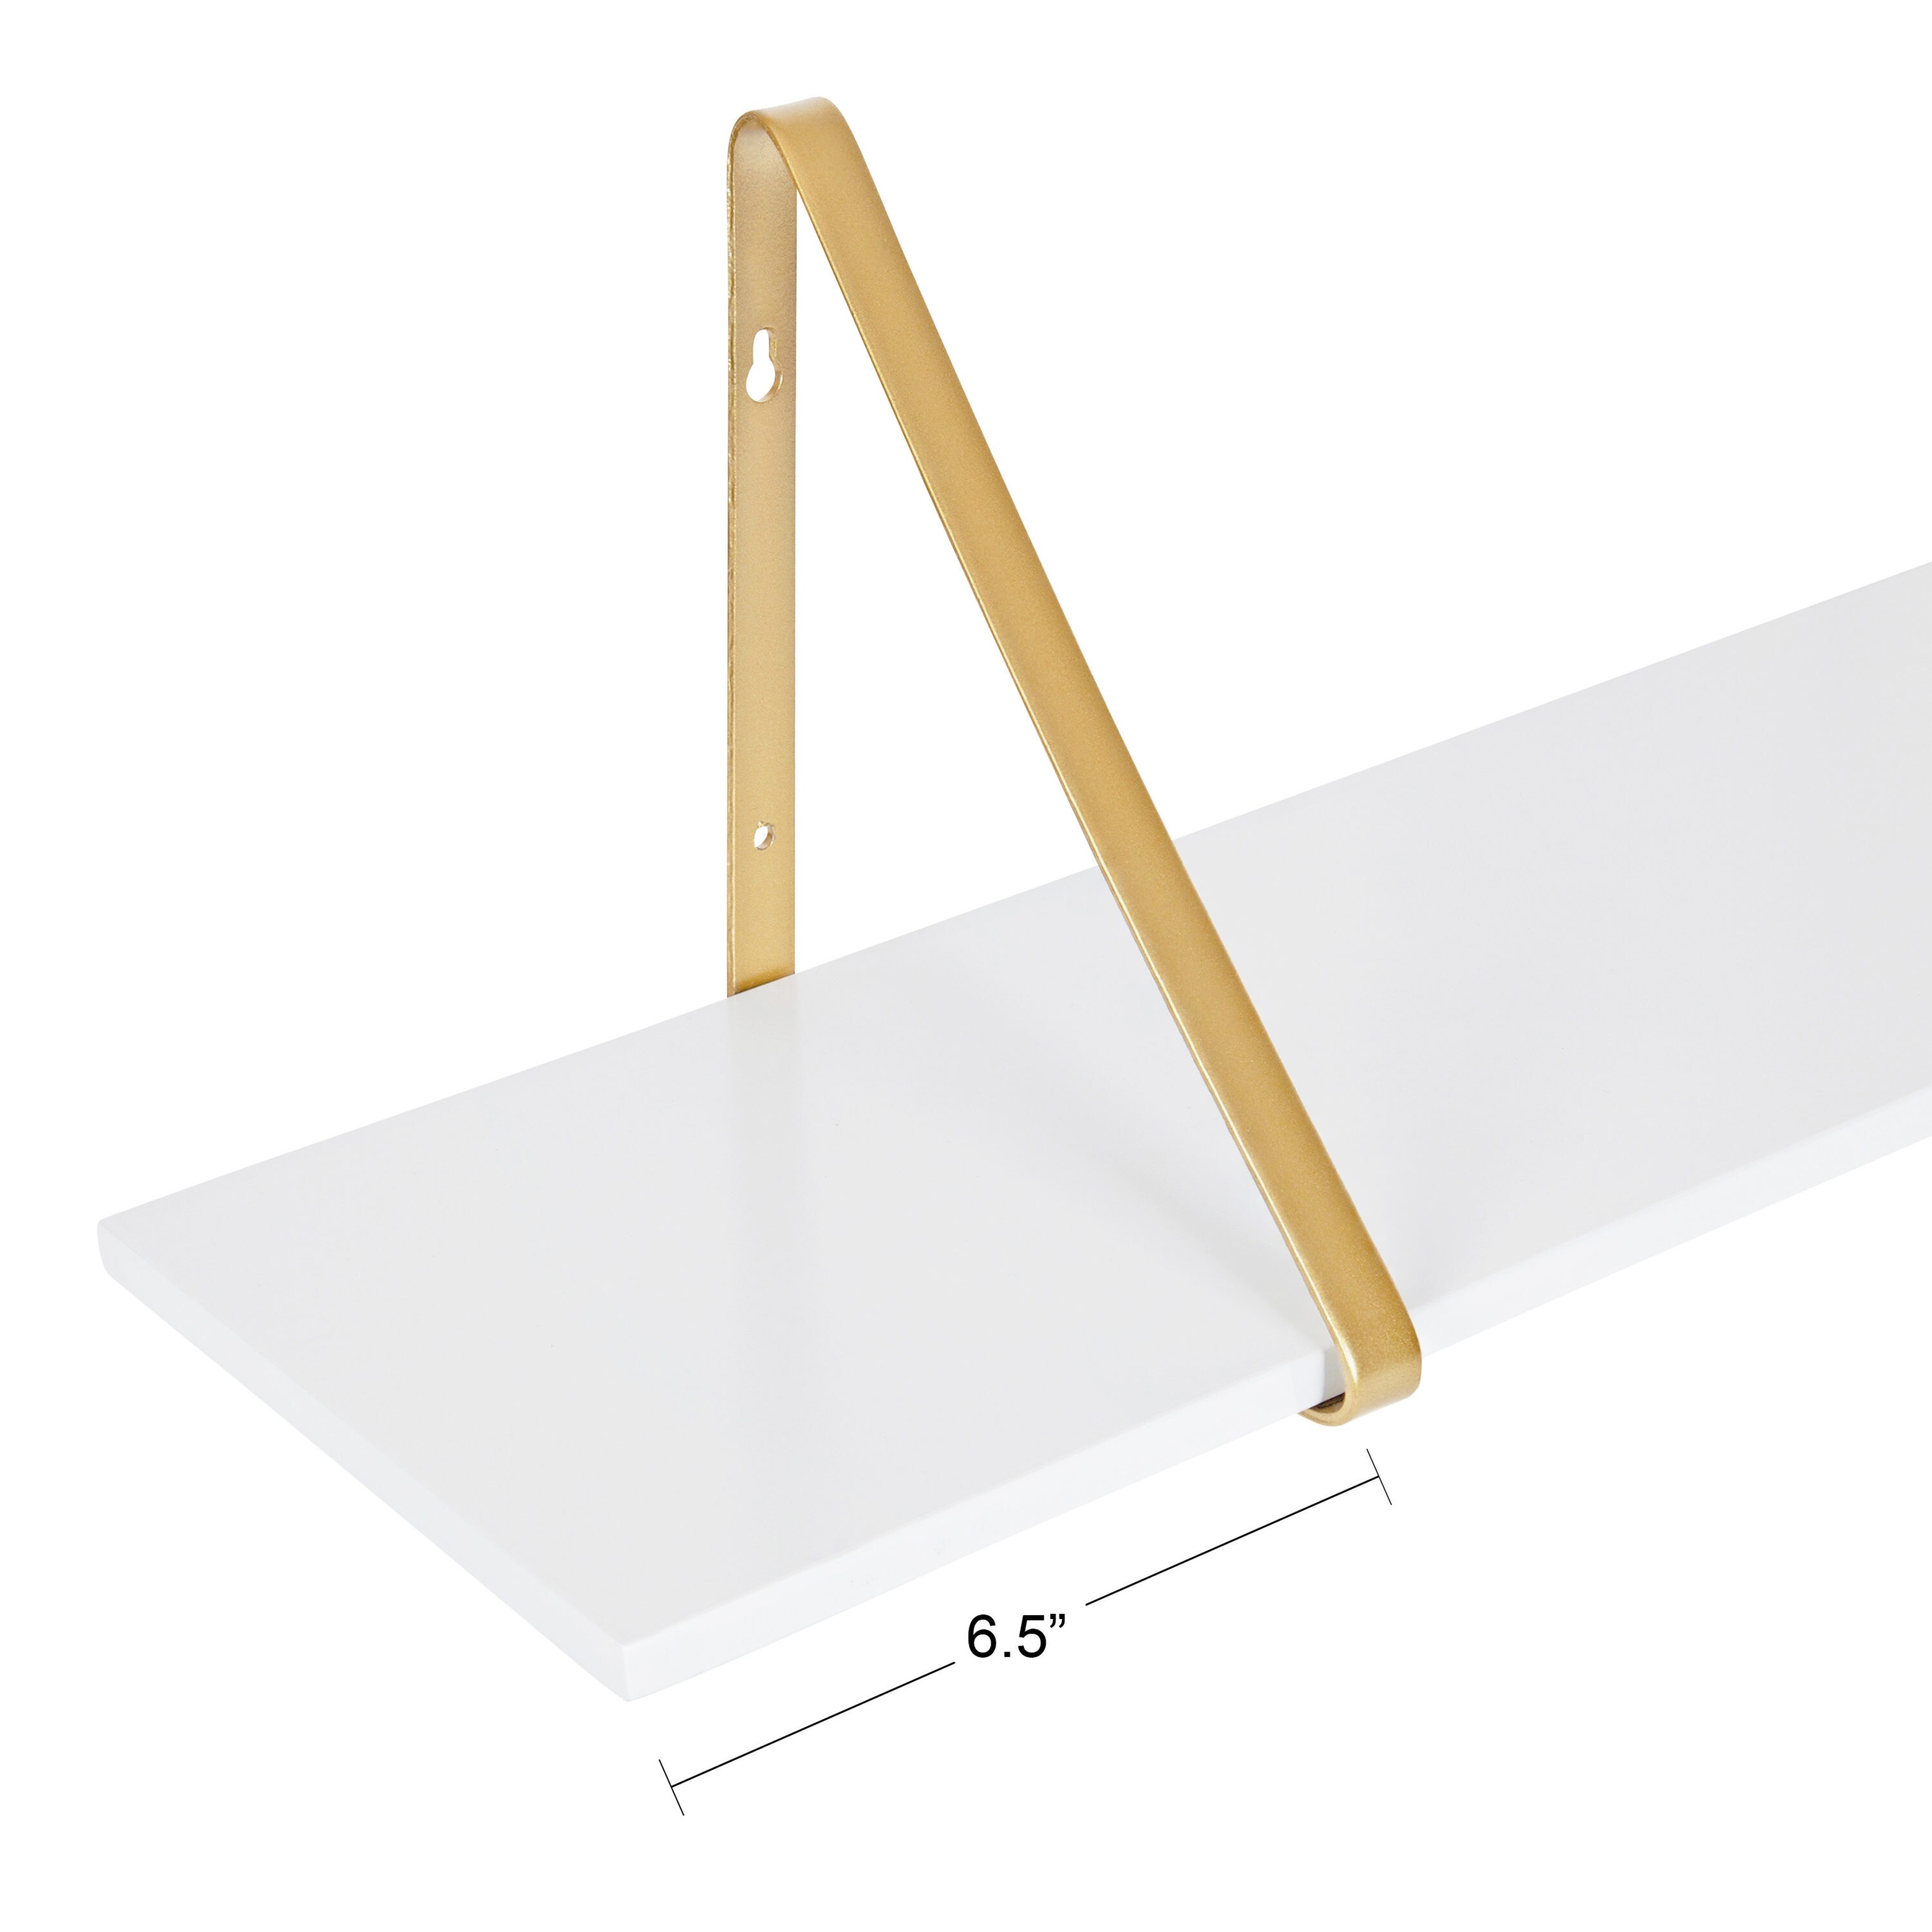 Kate and Laurel White/Gold Wood Bracket Shelf 38-in L x 8-in D (1 ...